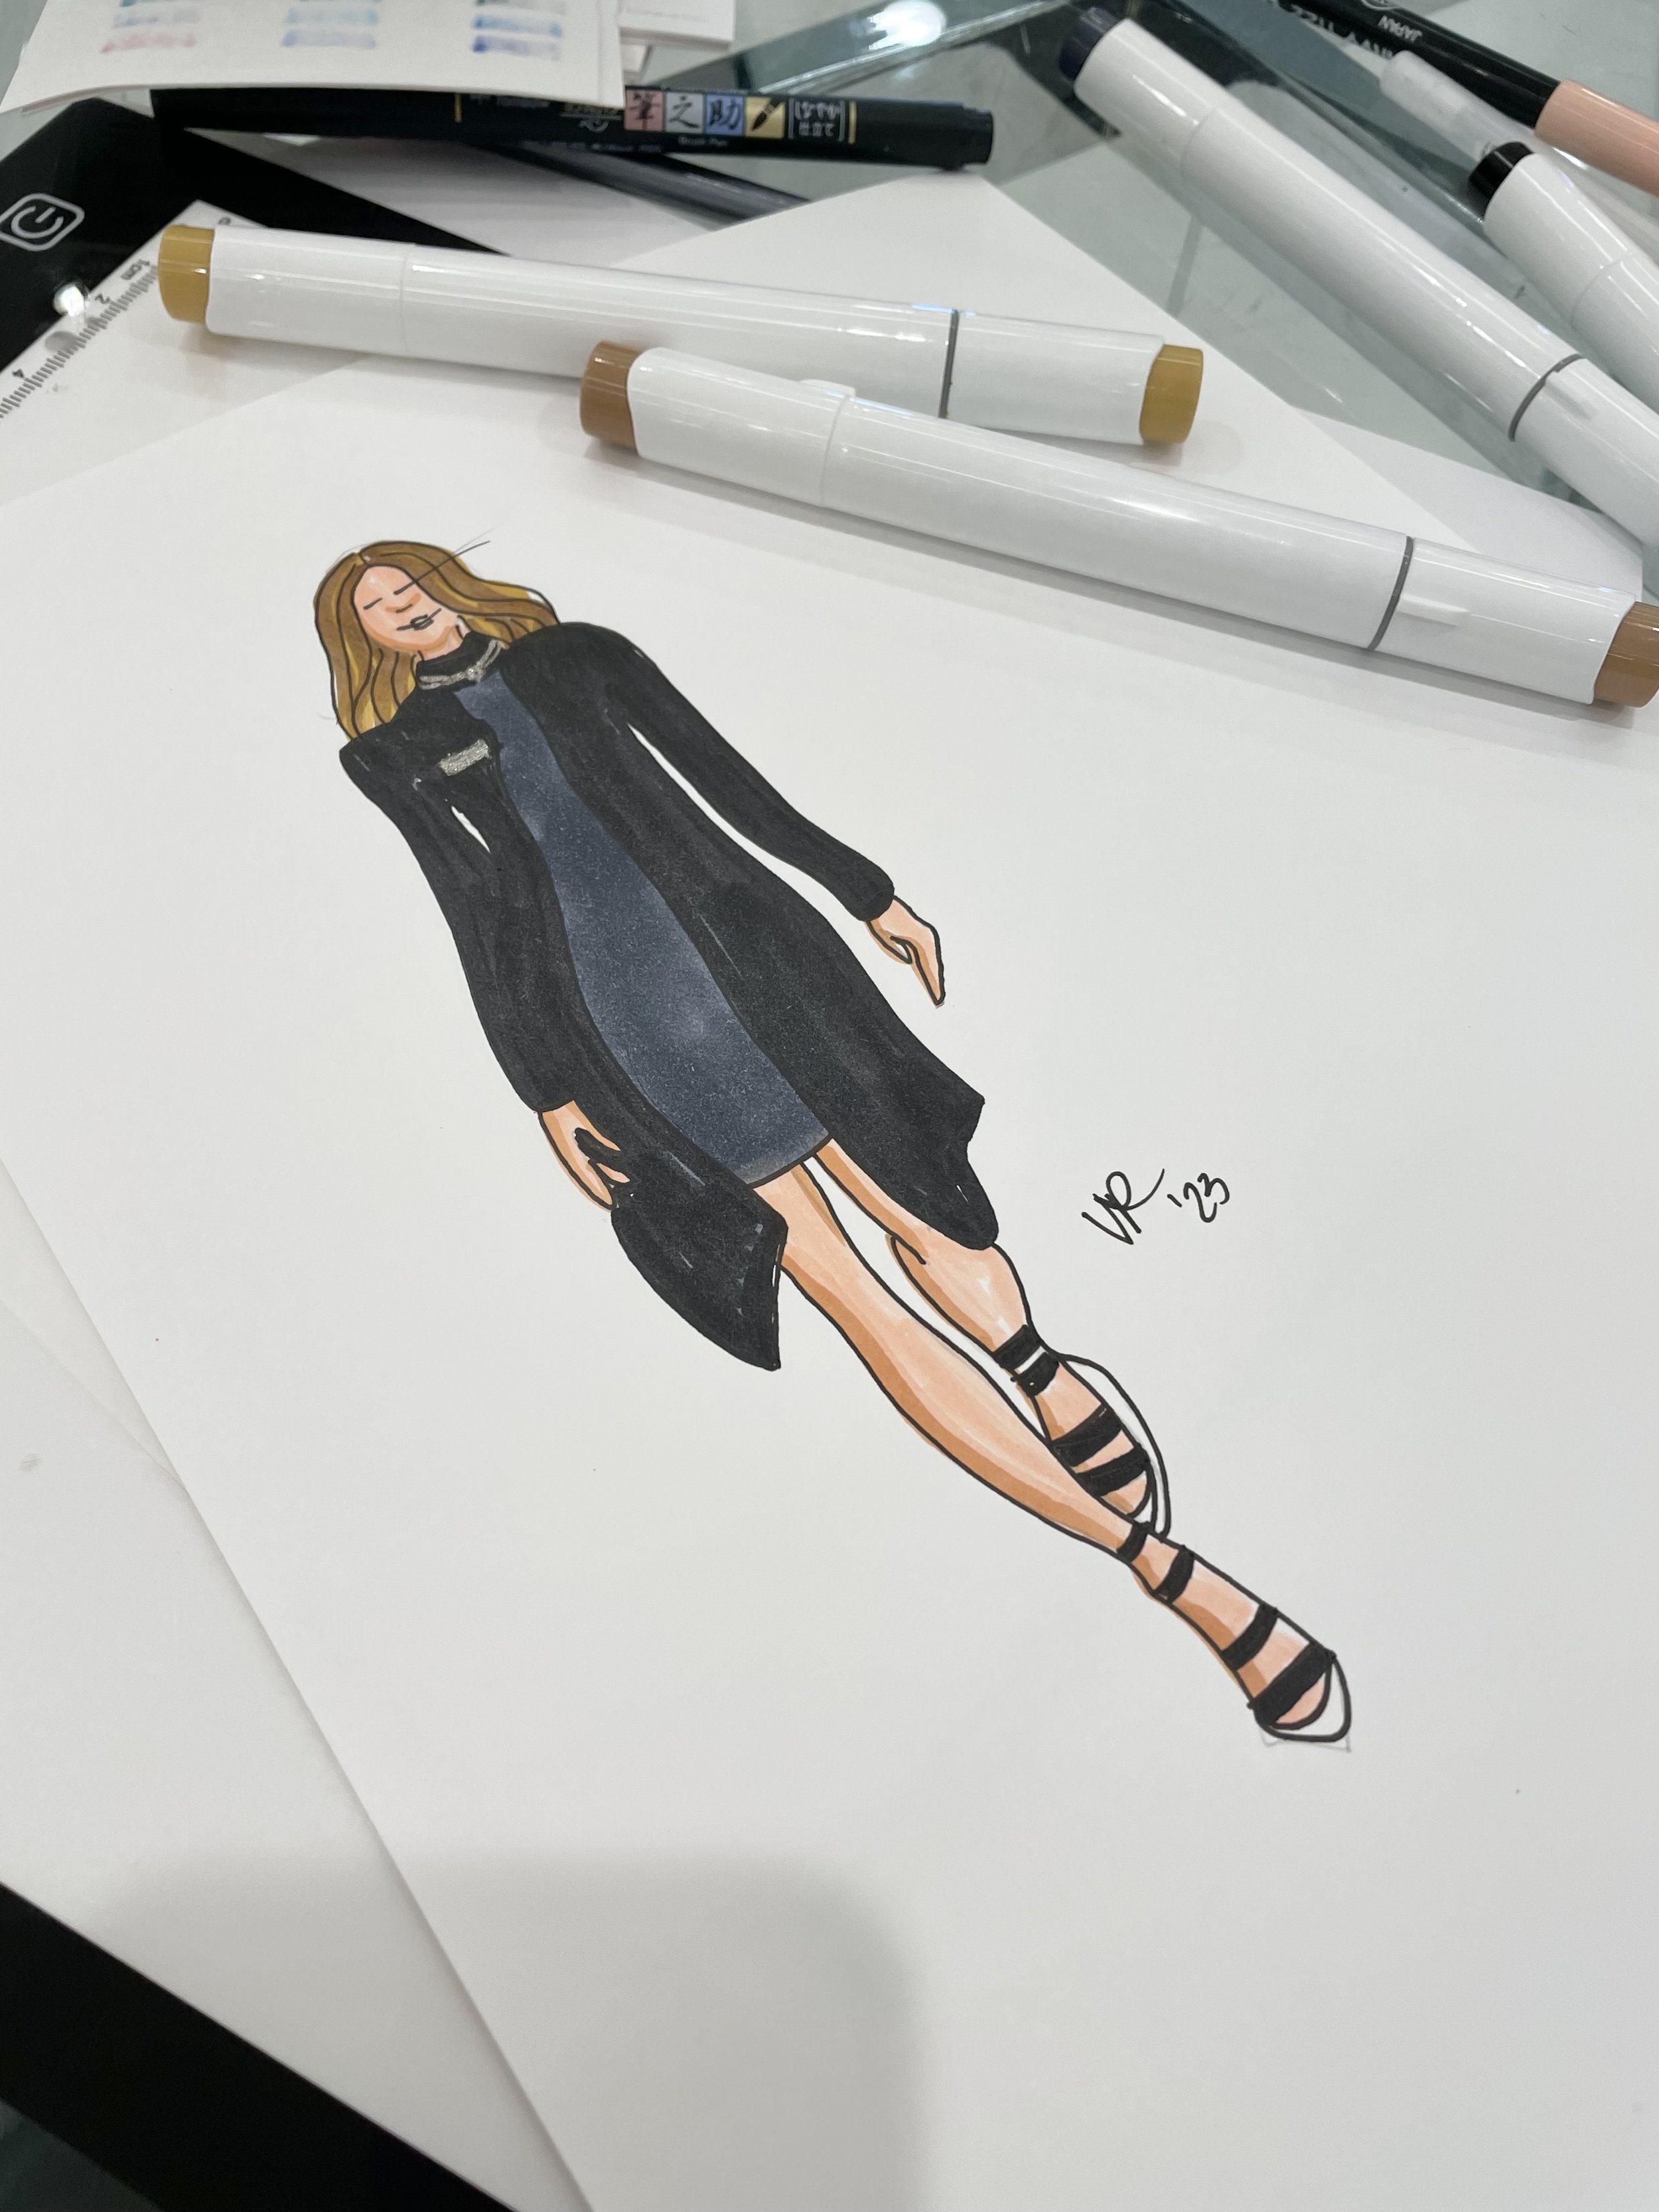 Live fashion portraits illustration by a handful of letters